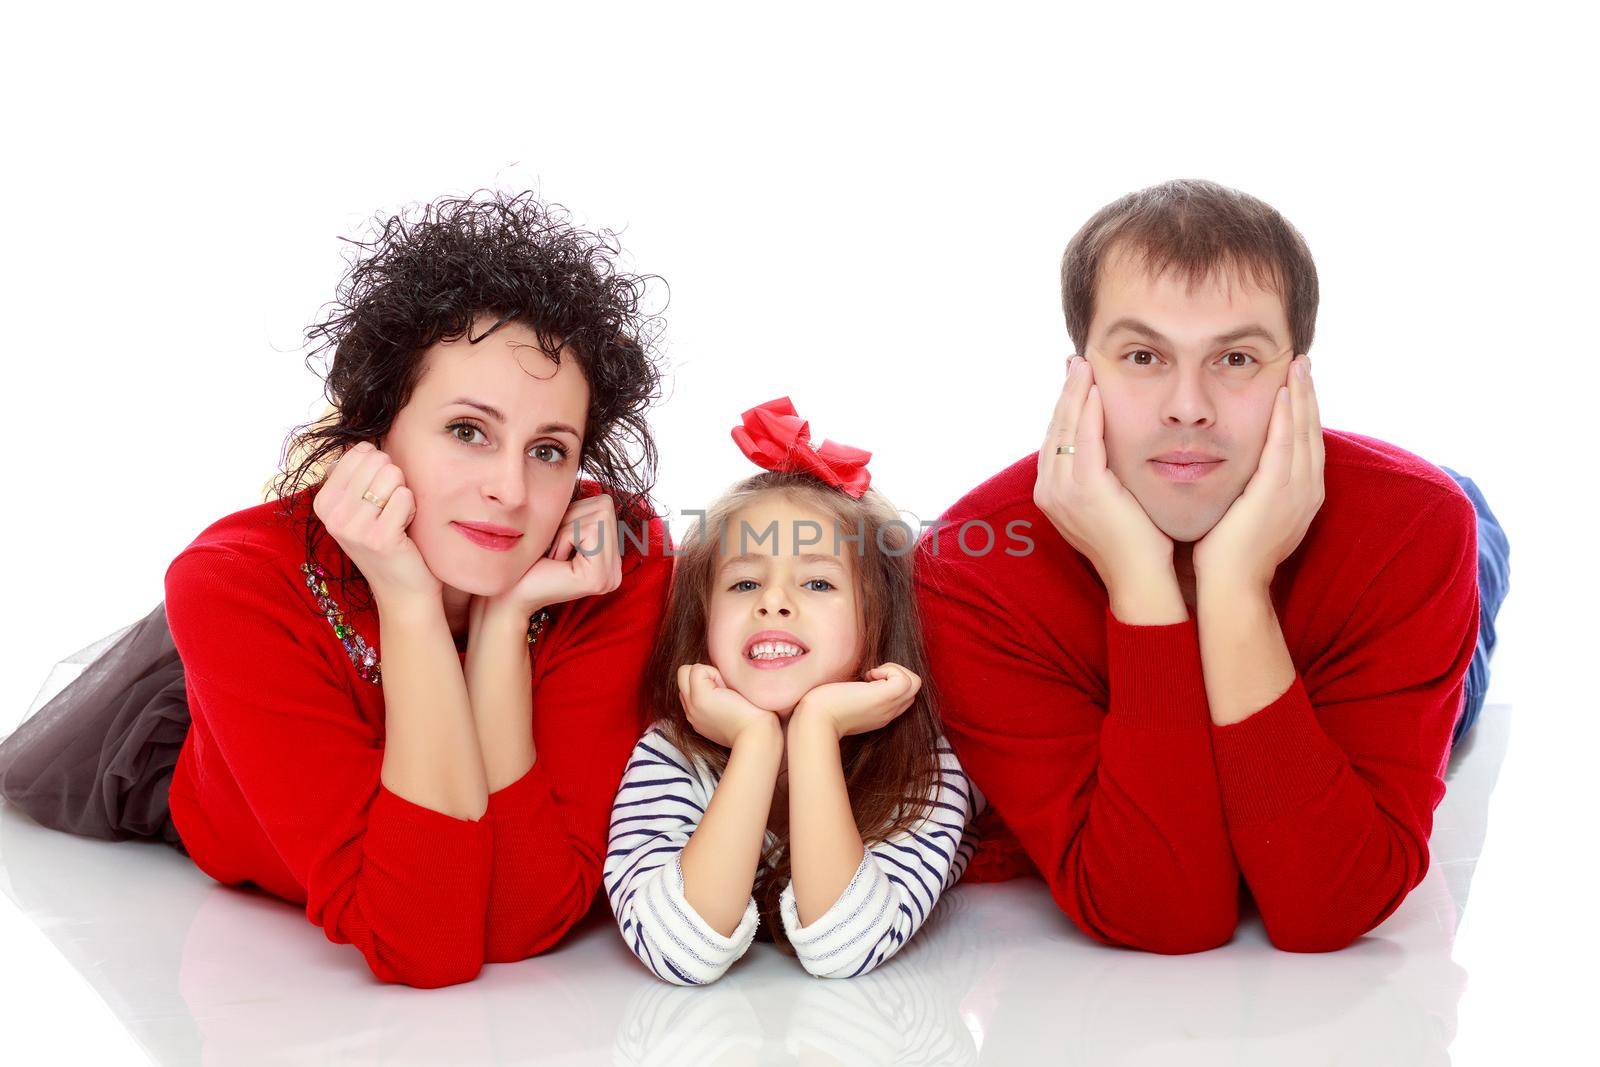 Happy young family dad mom and a little girl in bright red outfits . Family lying on the floor leaning on his hands.Isolated on white background.